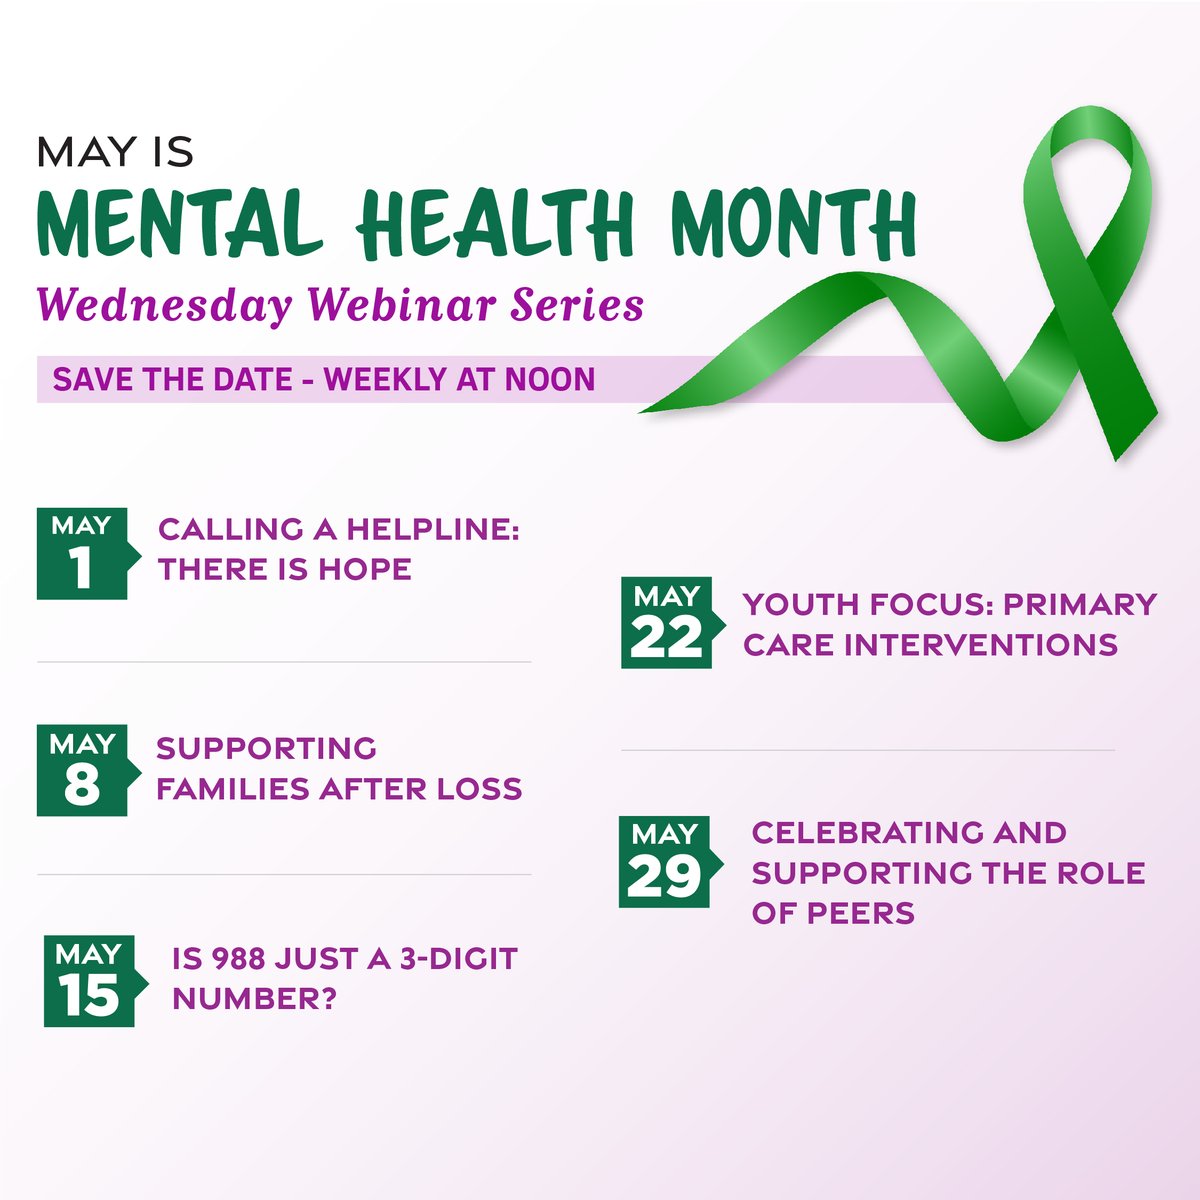 HAPPENING AT NOON: In honor of #MentalHealthMonth, @NJDHS' Division of Mental Health & Addictions is holding its 4th Wednesday Webinar Series entitled: Youth Focus: Primary Care Interventions. Register here: dhs-nj-gov.zoomgov.com/webinar/regist…